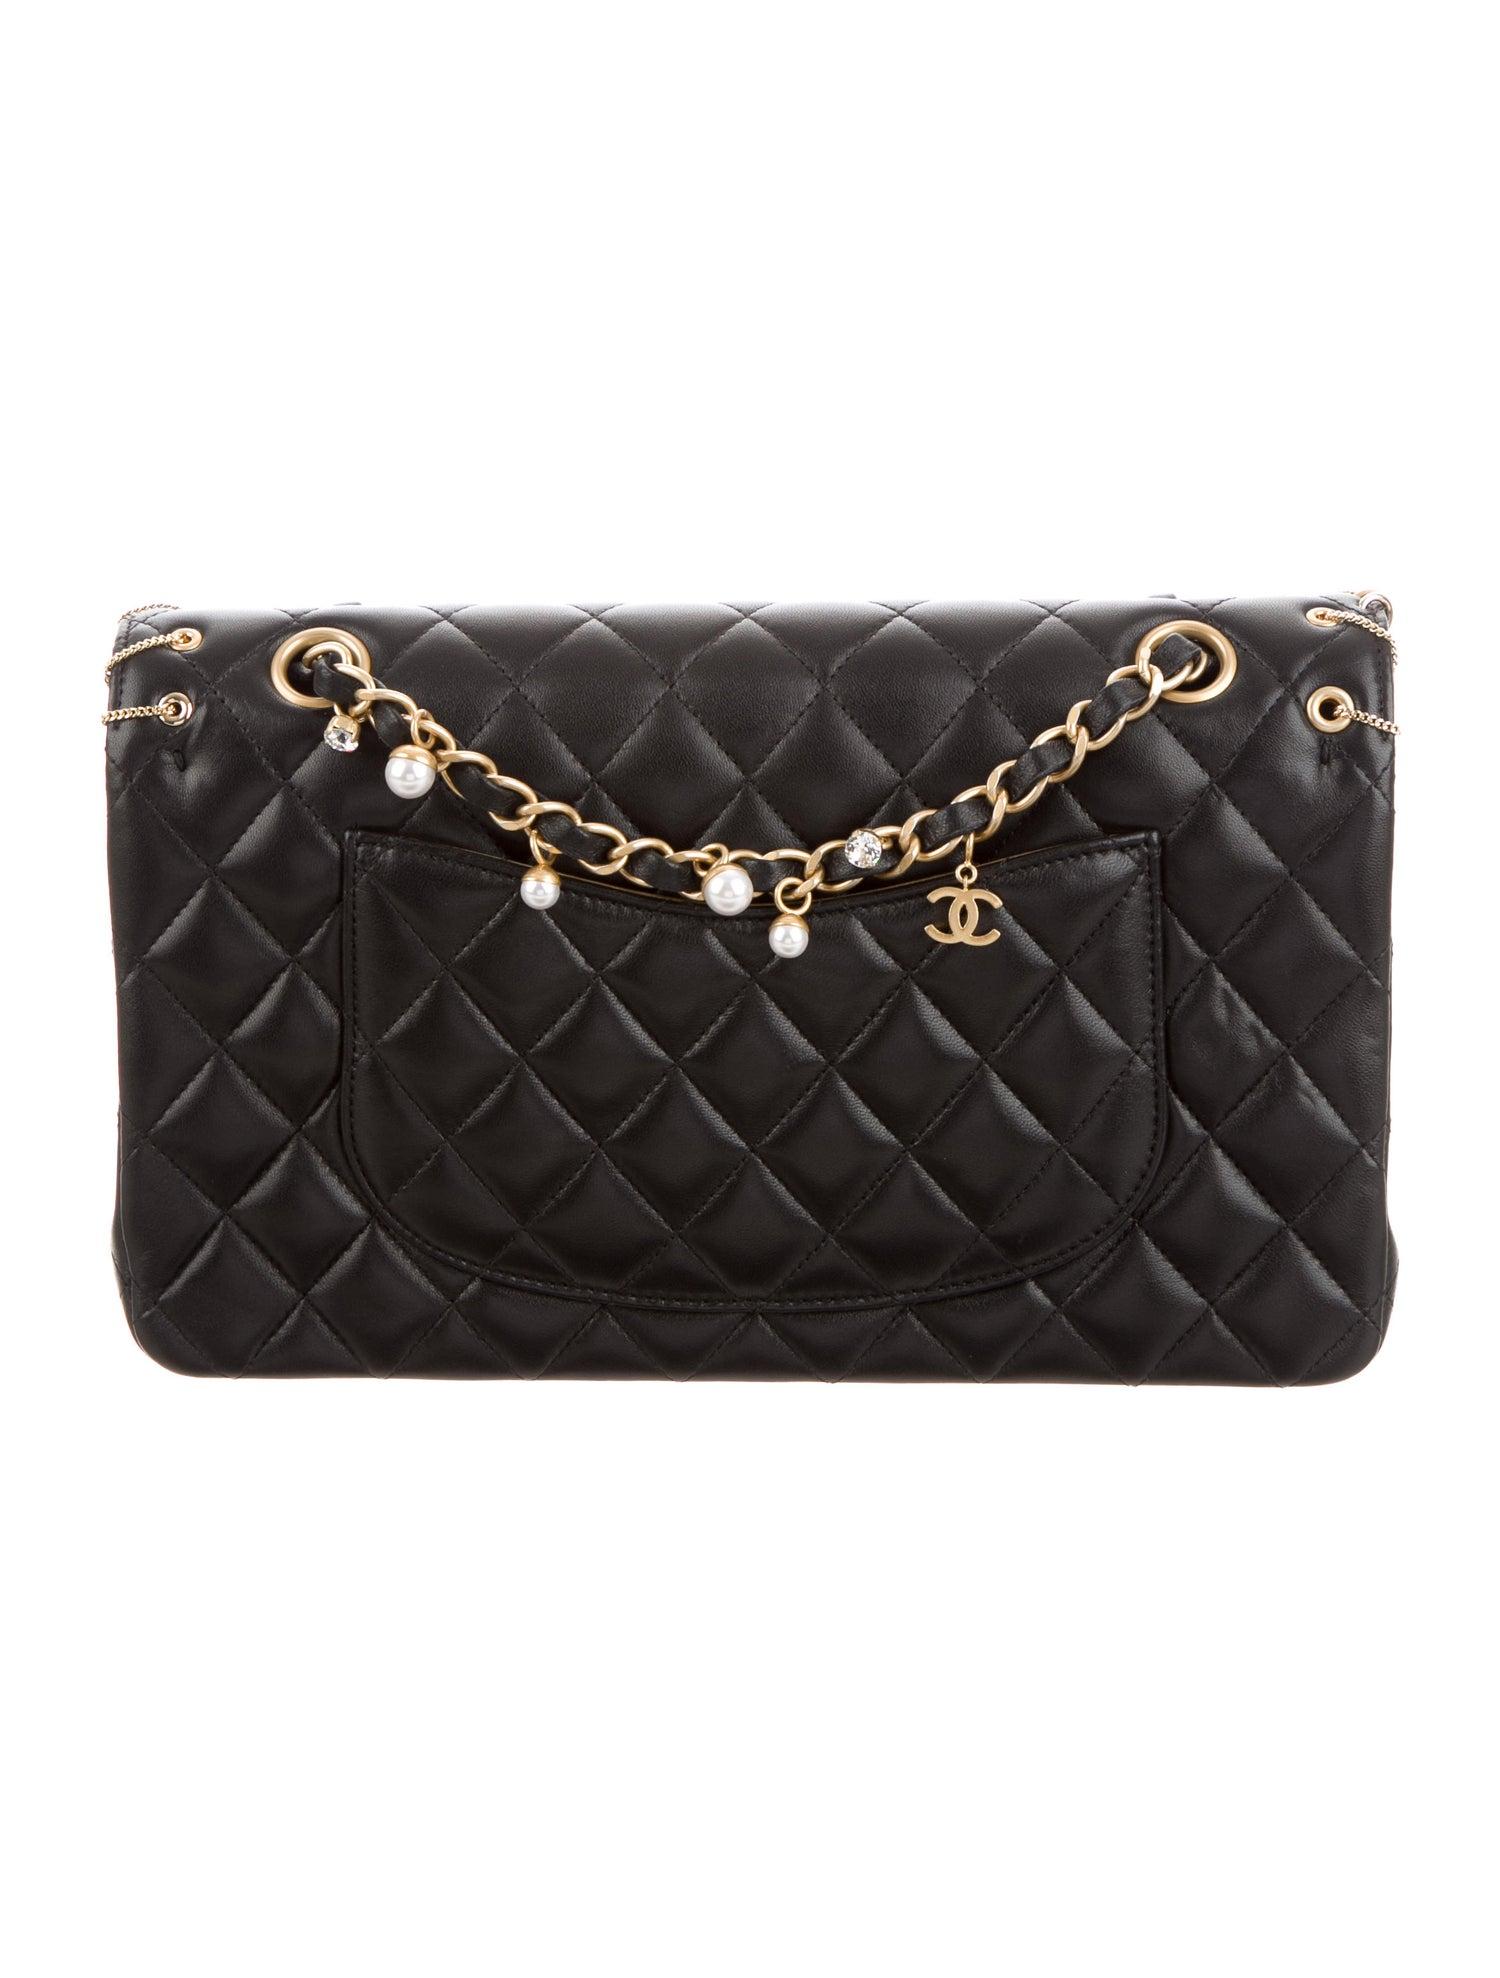 Women's Chanel NEW Black Leather Gold Charm Chain Pearl Shoulder Flap Bag in Box 